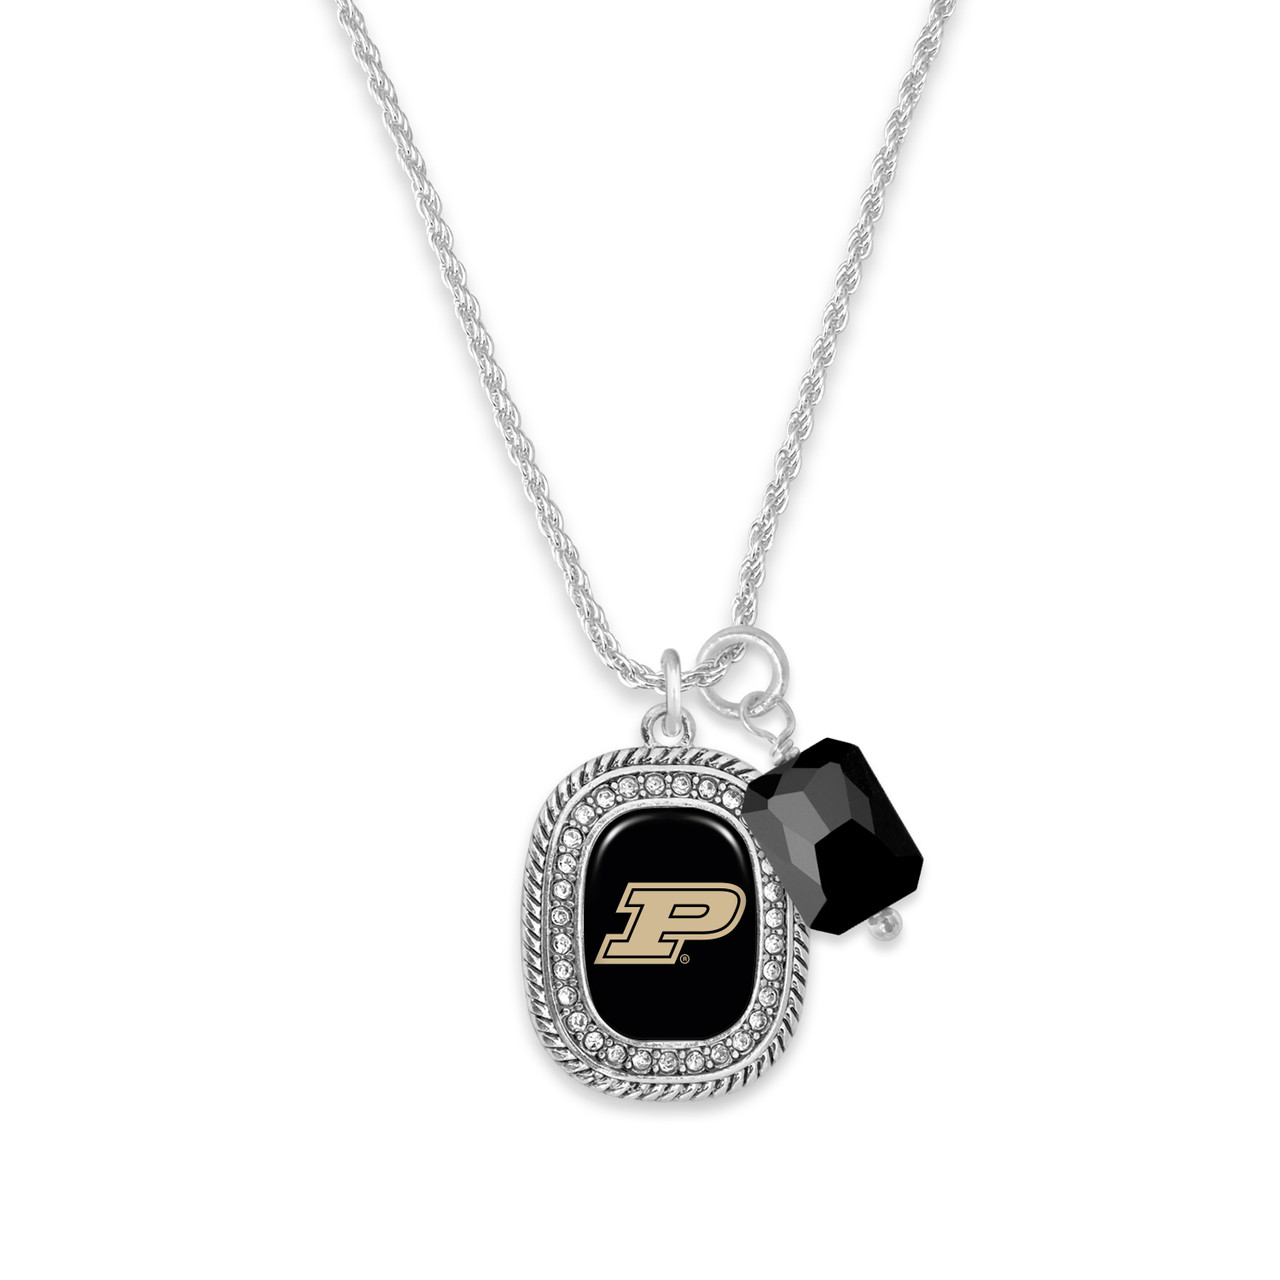 Purdue Boilermakers Necklace - Madison